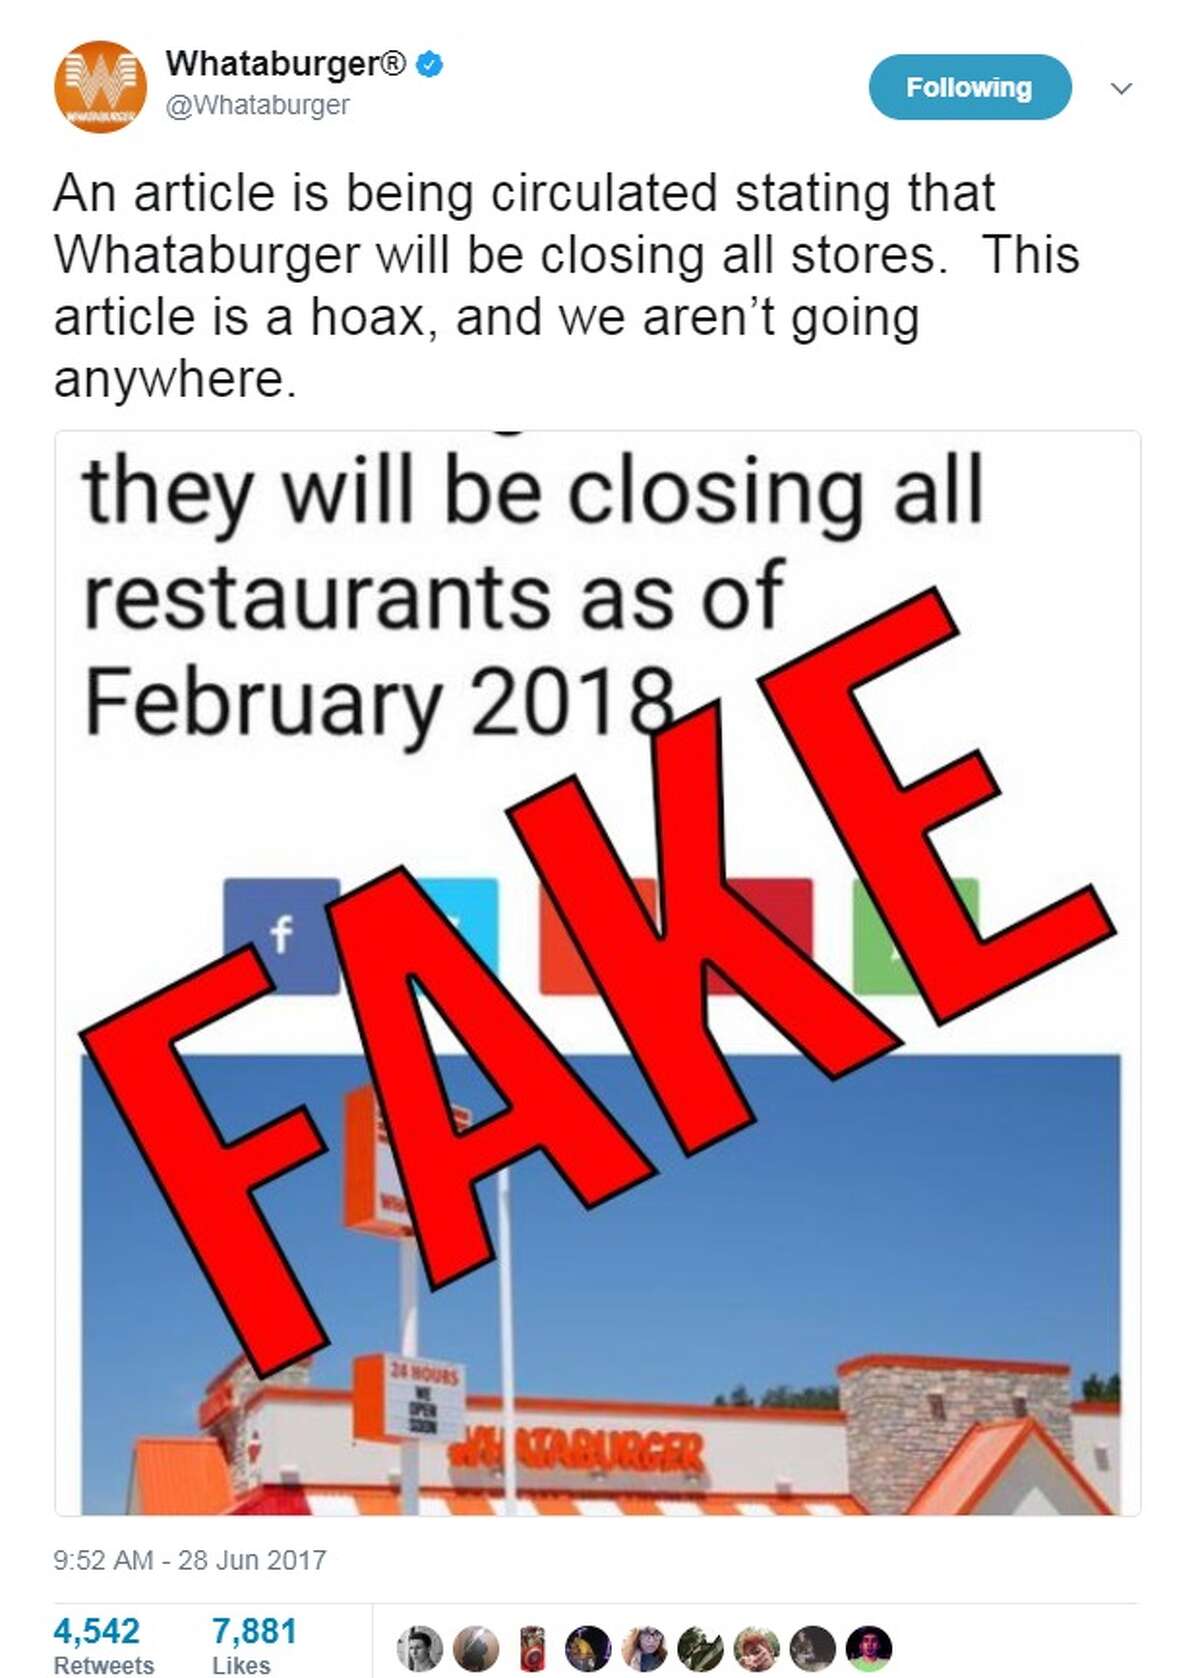 Whataburger responded on their social media accounts to debunk the "article."